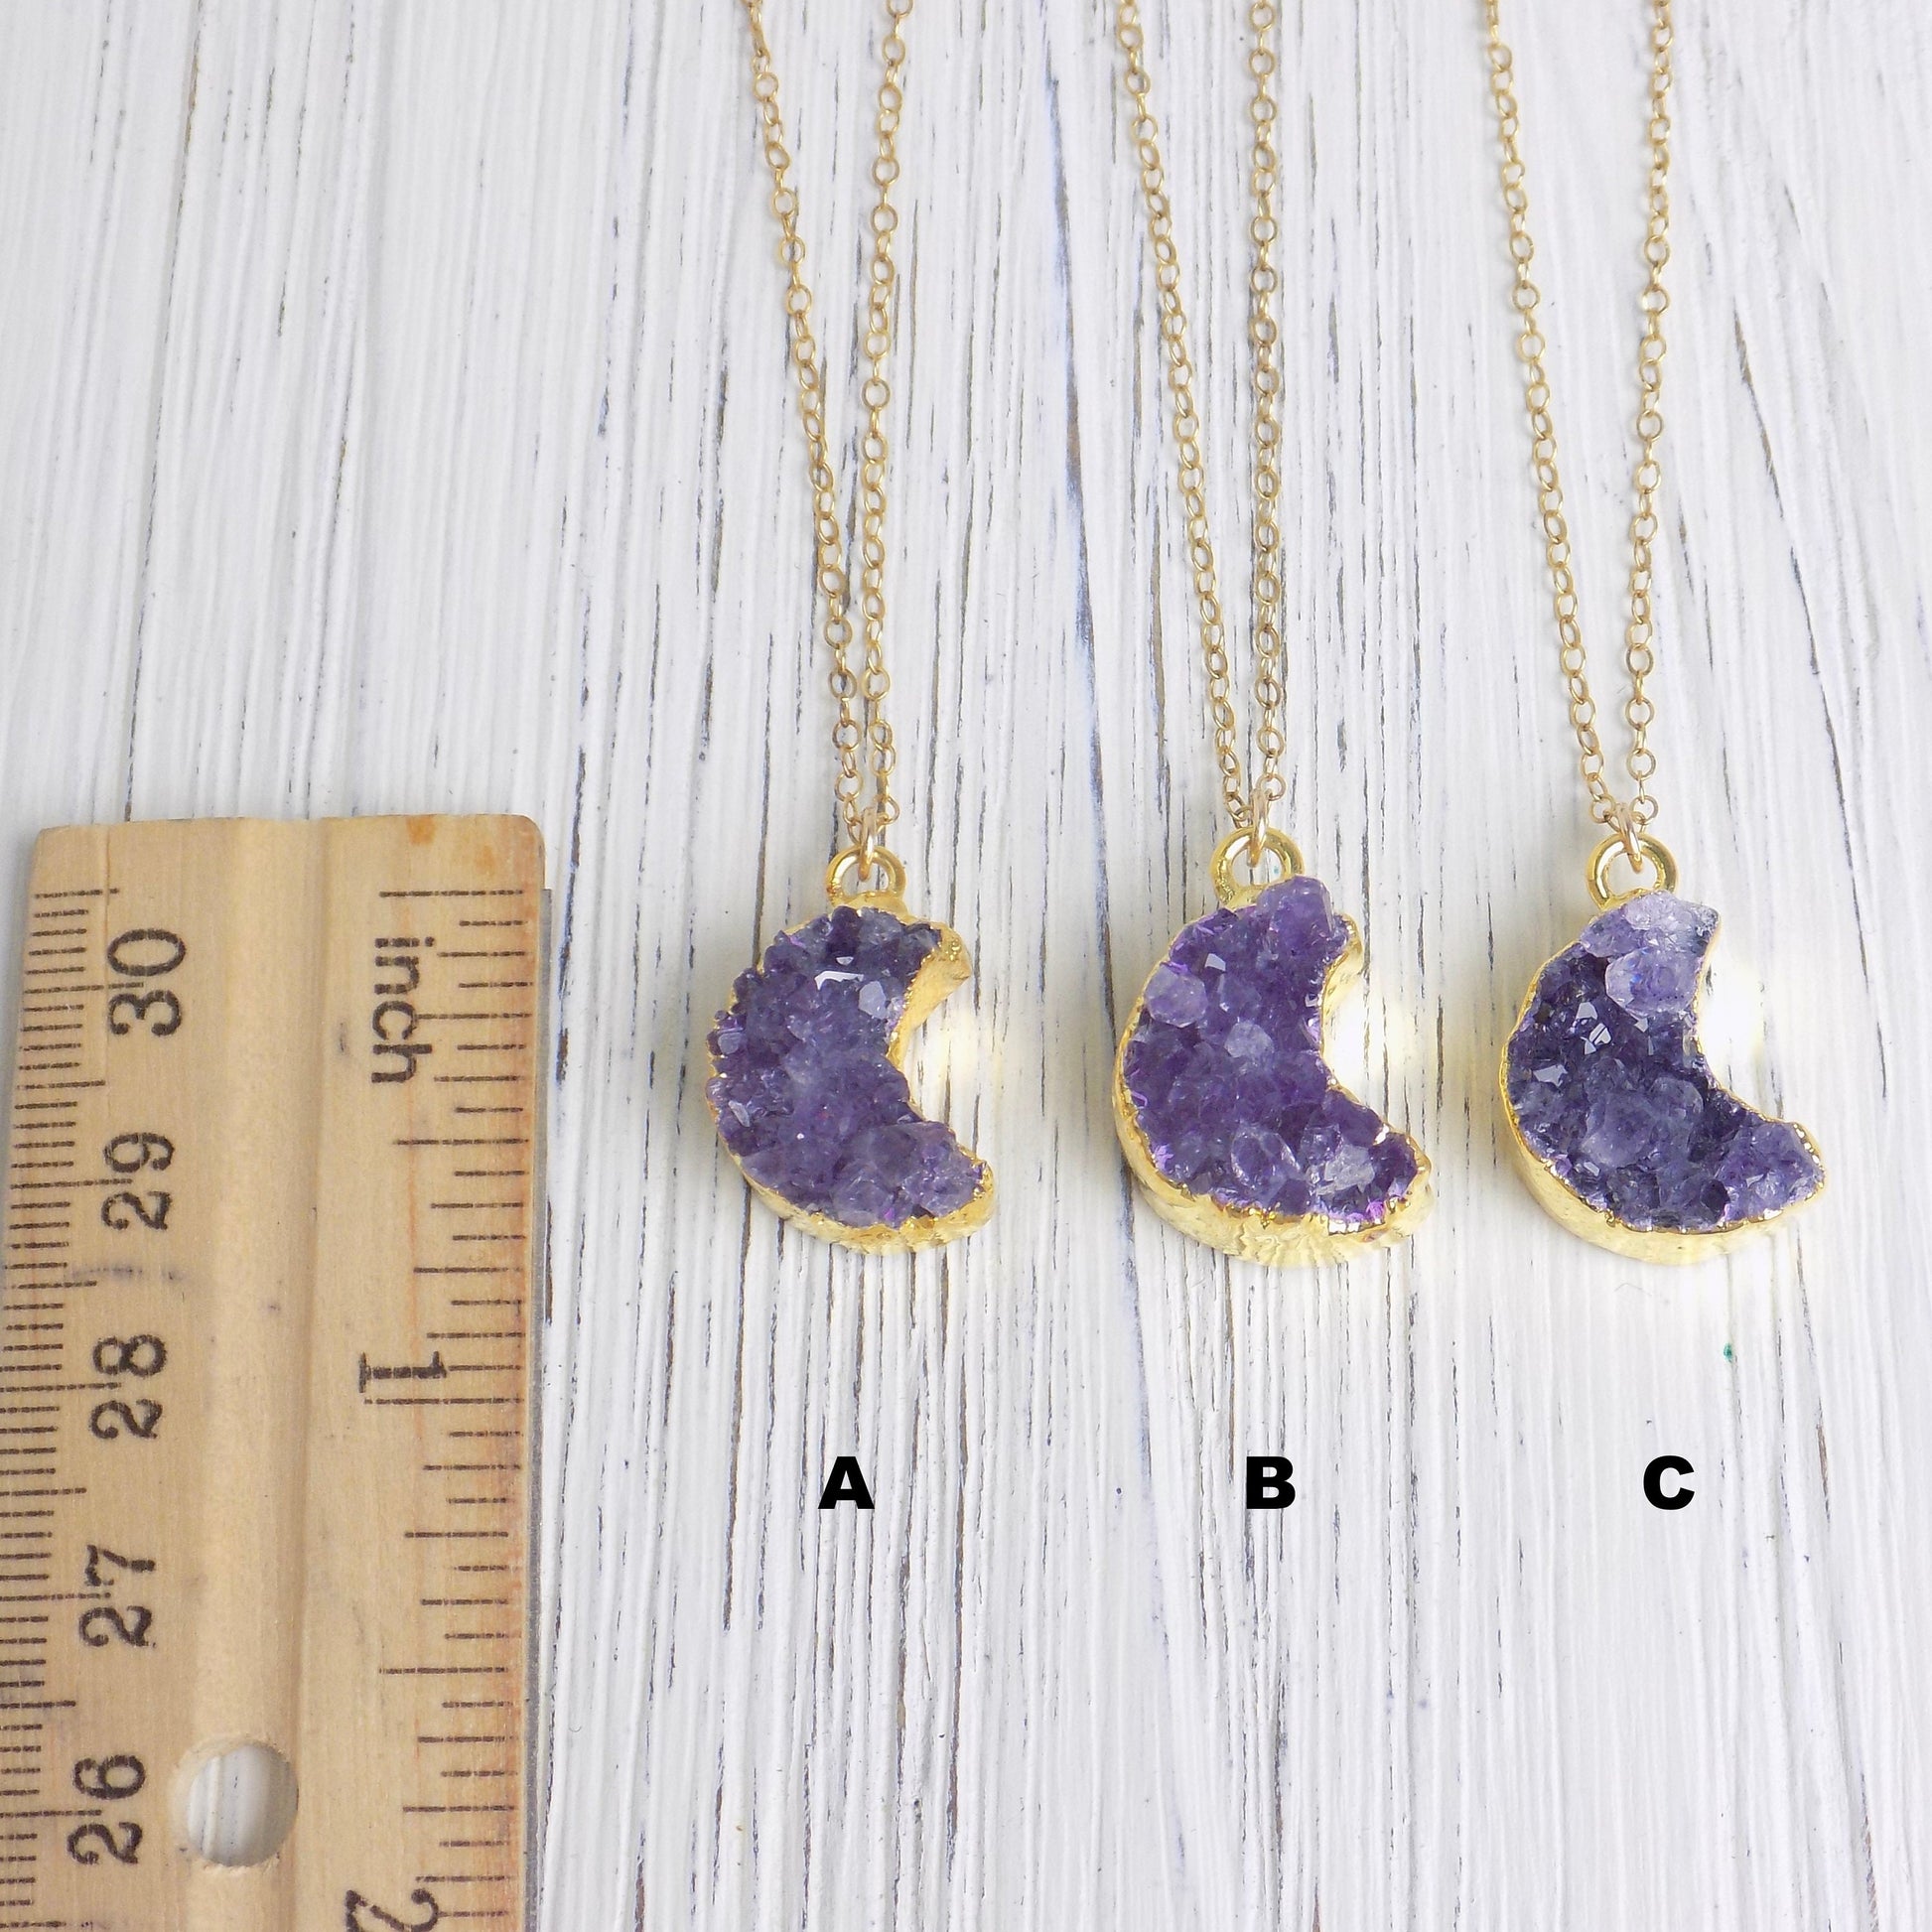 Amethyst Moon Necklace Gold, Crescent Moon, Purple Druzy Pendant Small, Christmas Gifts For Her, R14-02